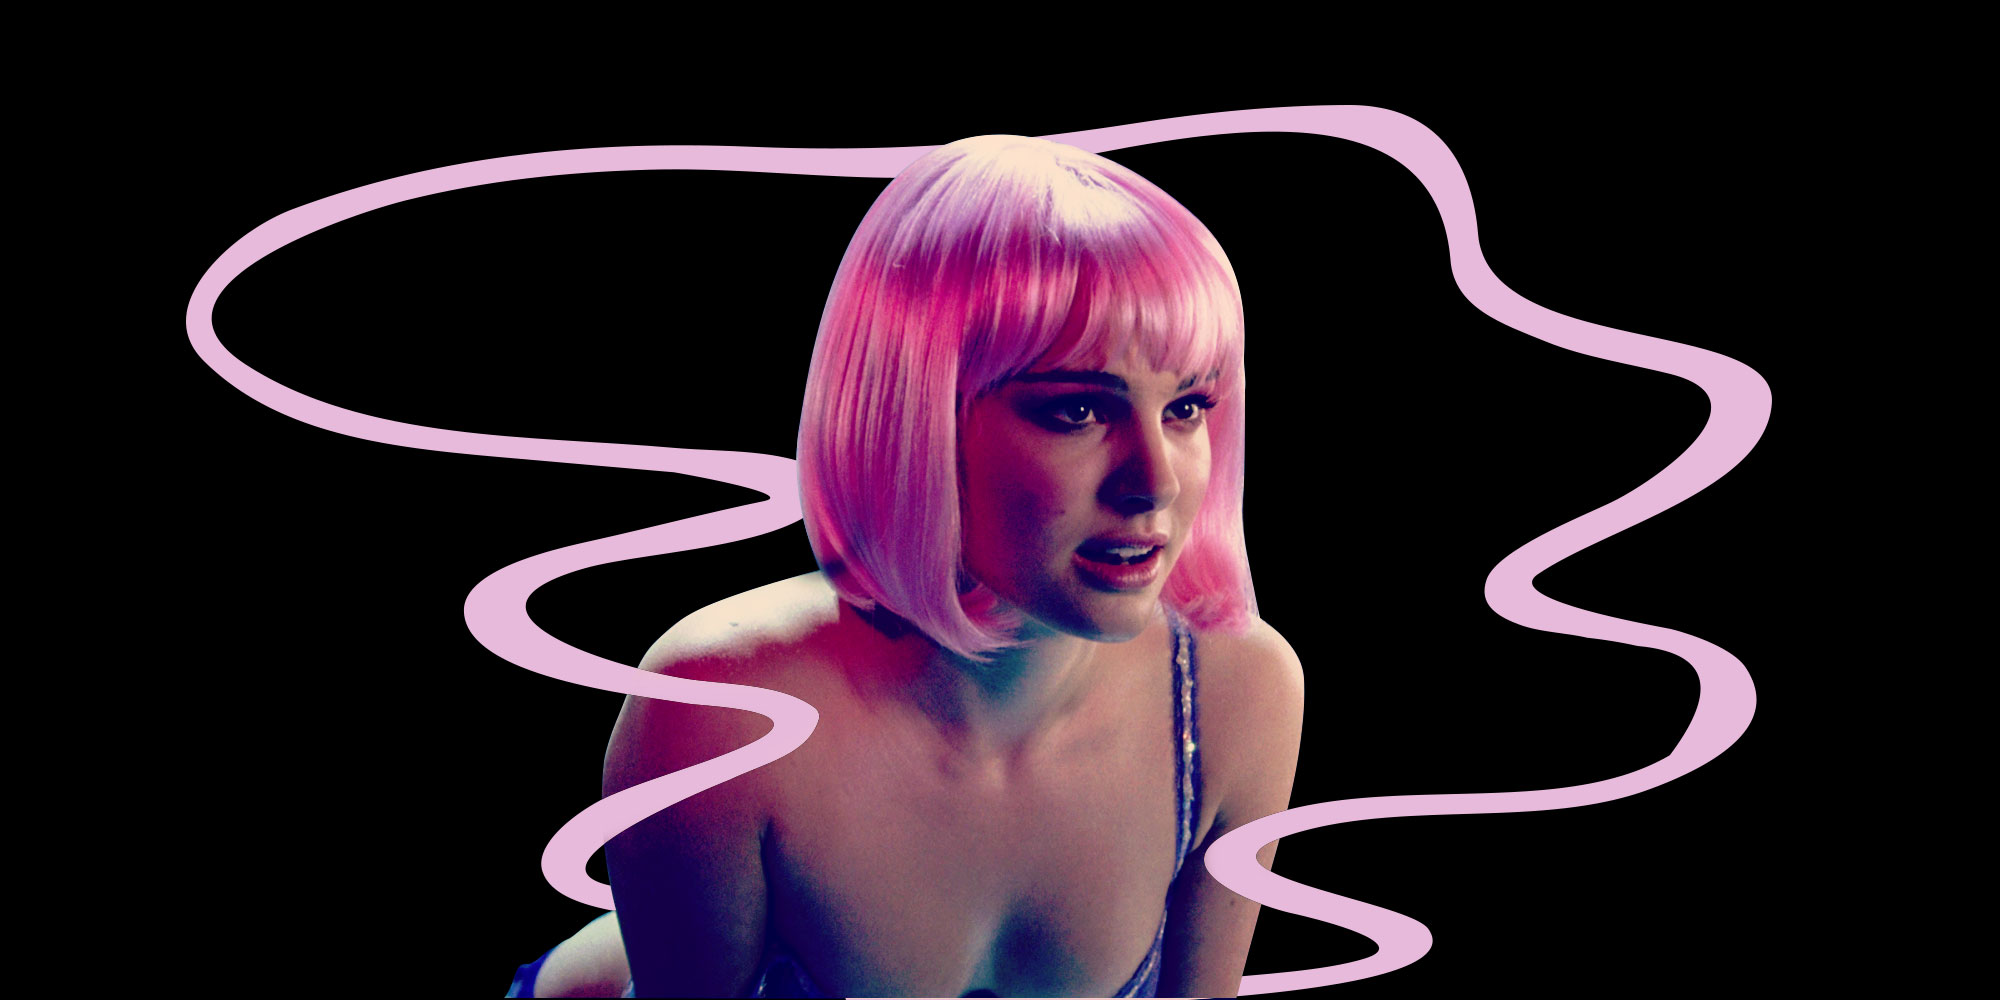 A woman in a pink wig, leaning forward against a black background with a pink graphic element winding through